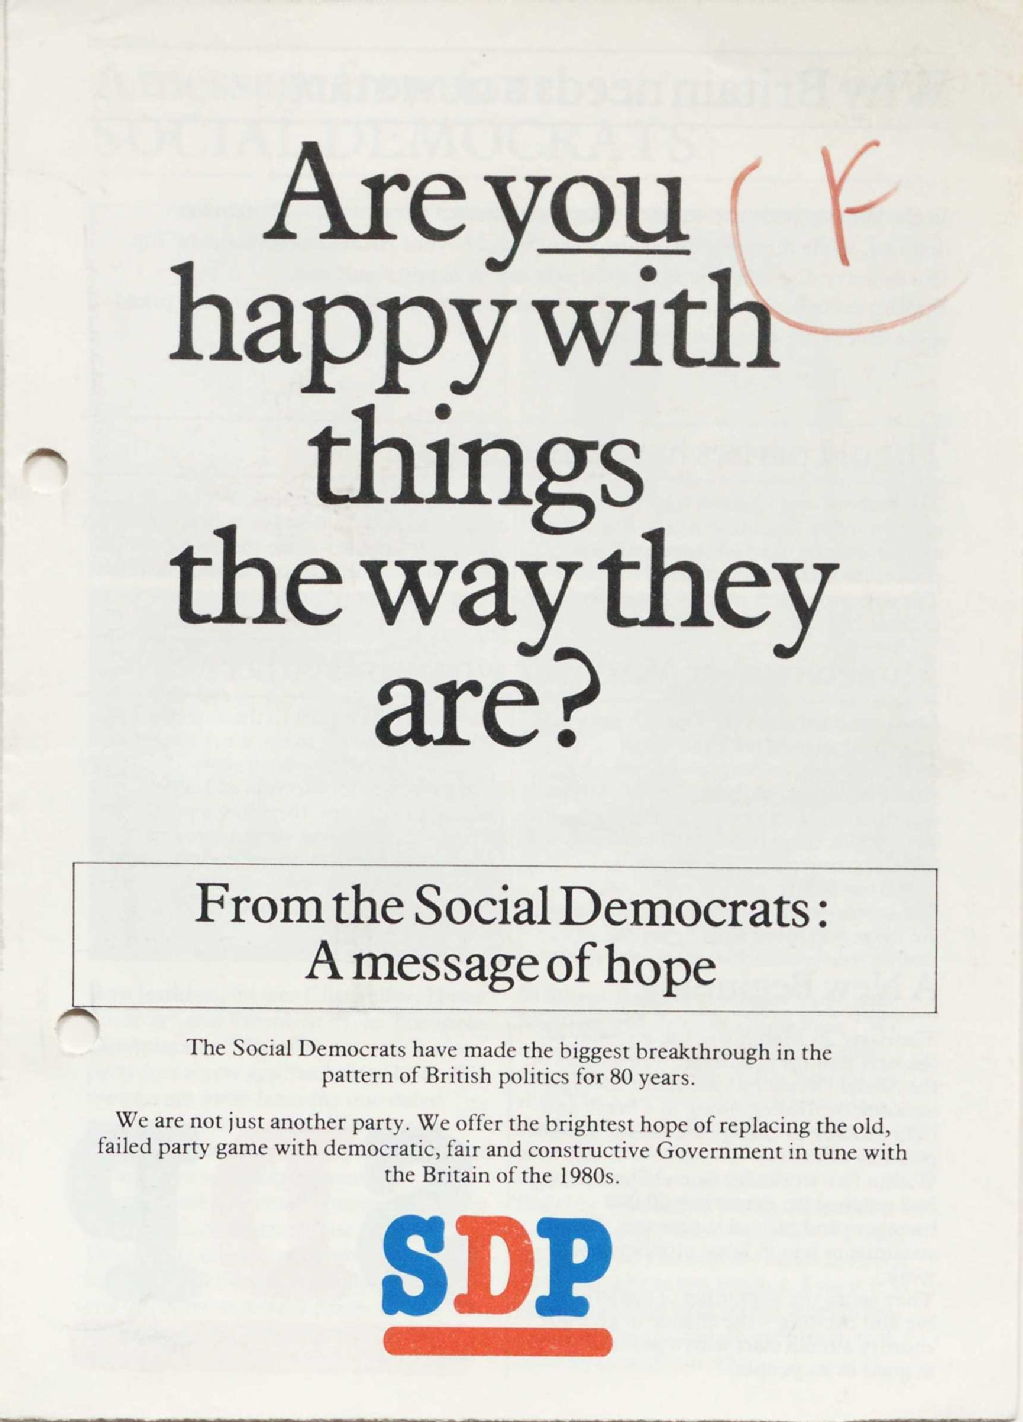 "Are you happy with things the way they are?", 1981